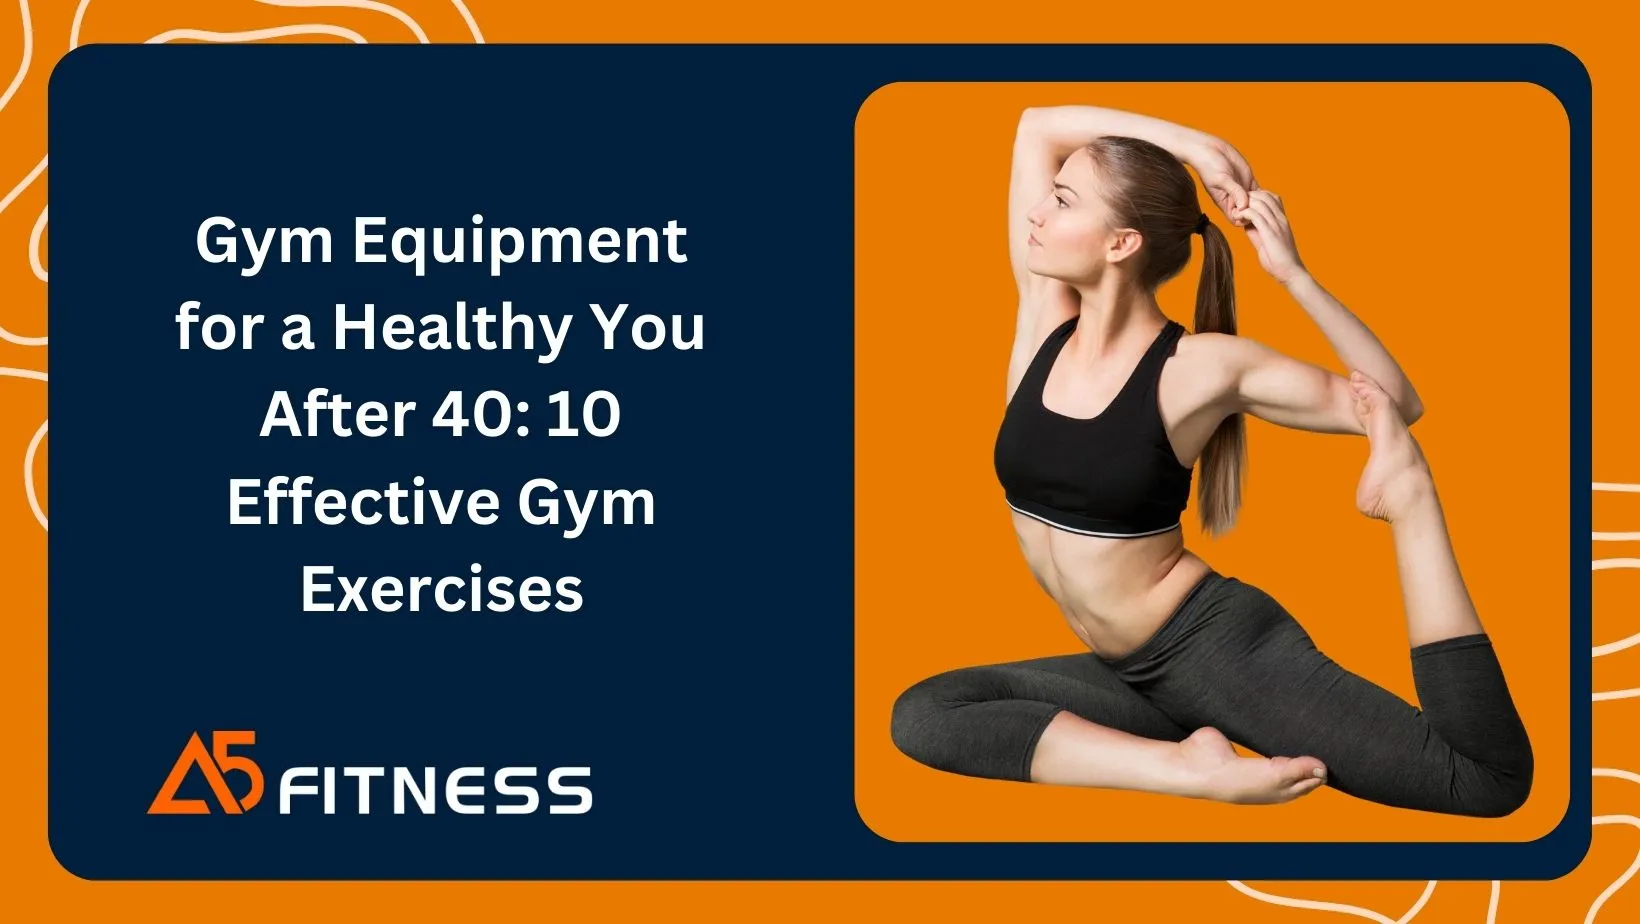 gym exercises and Equipment